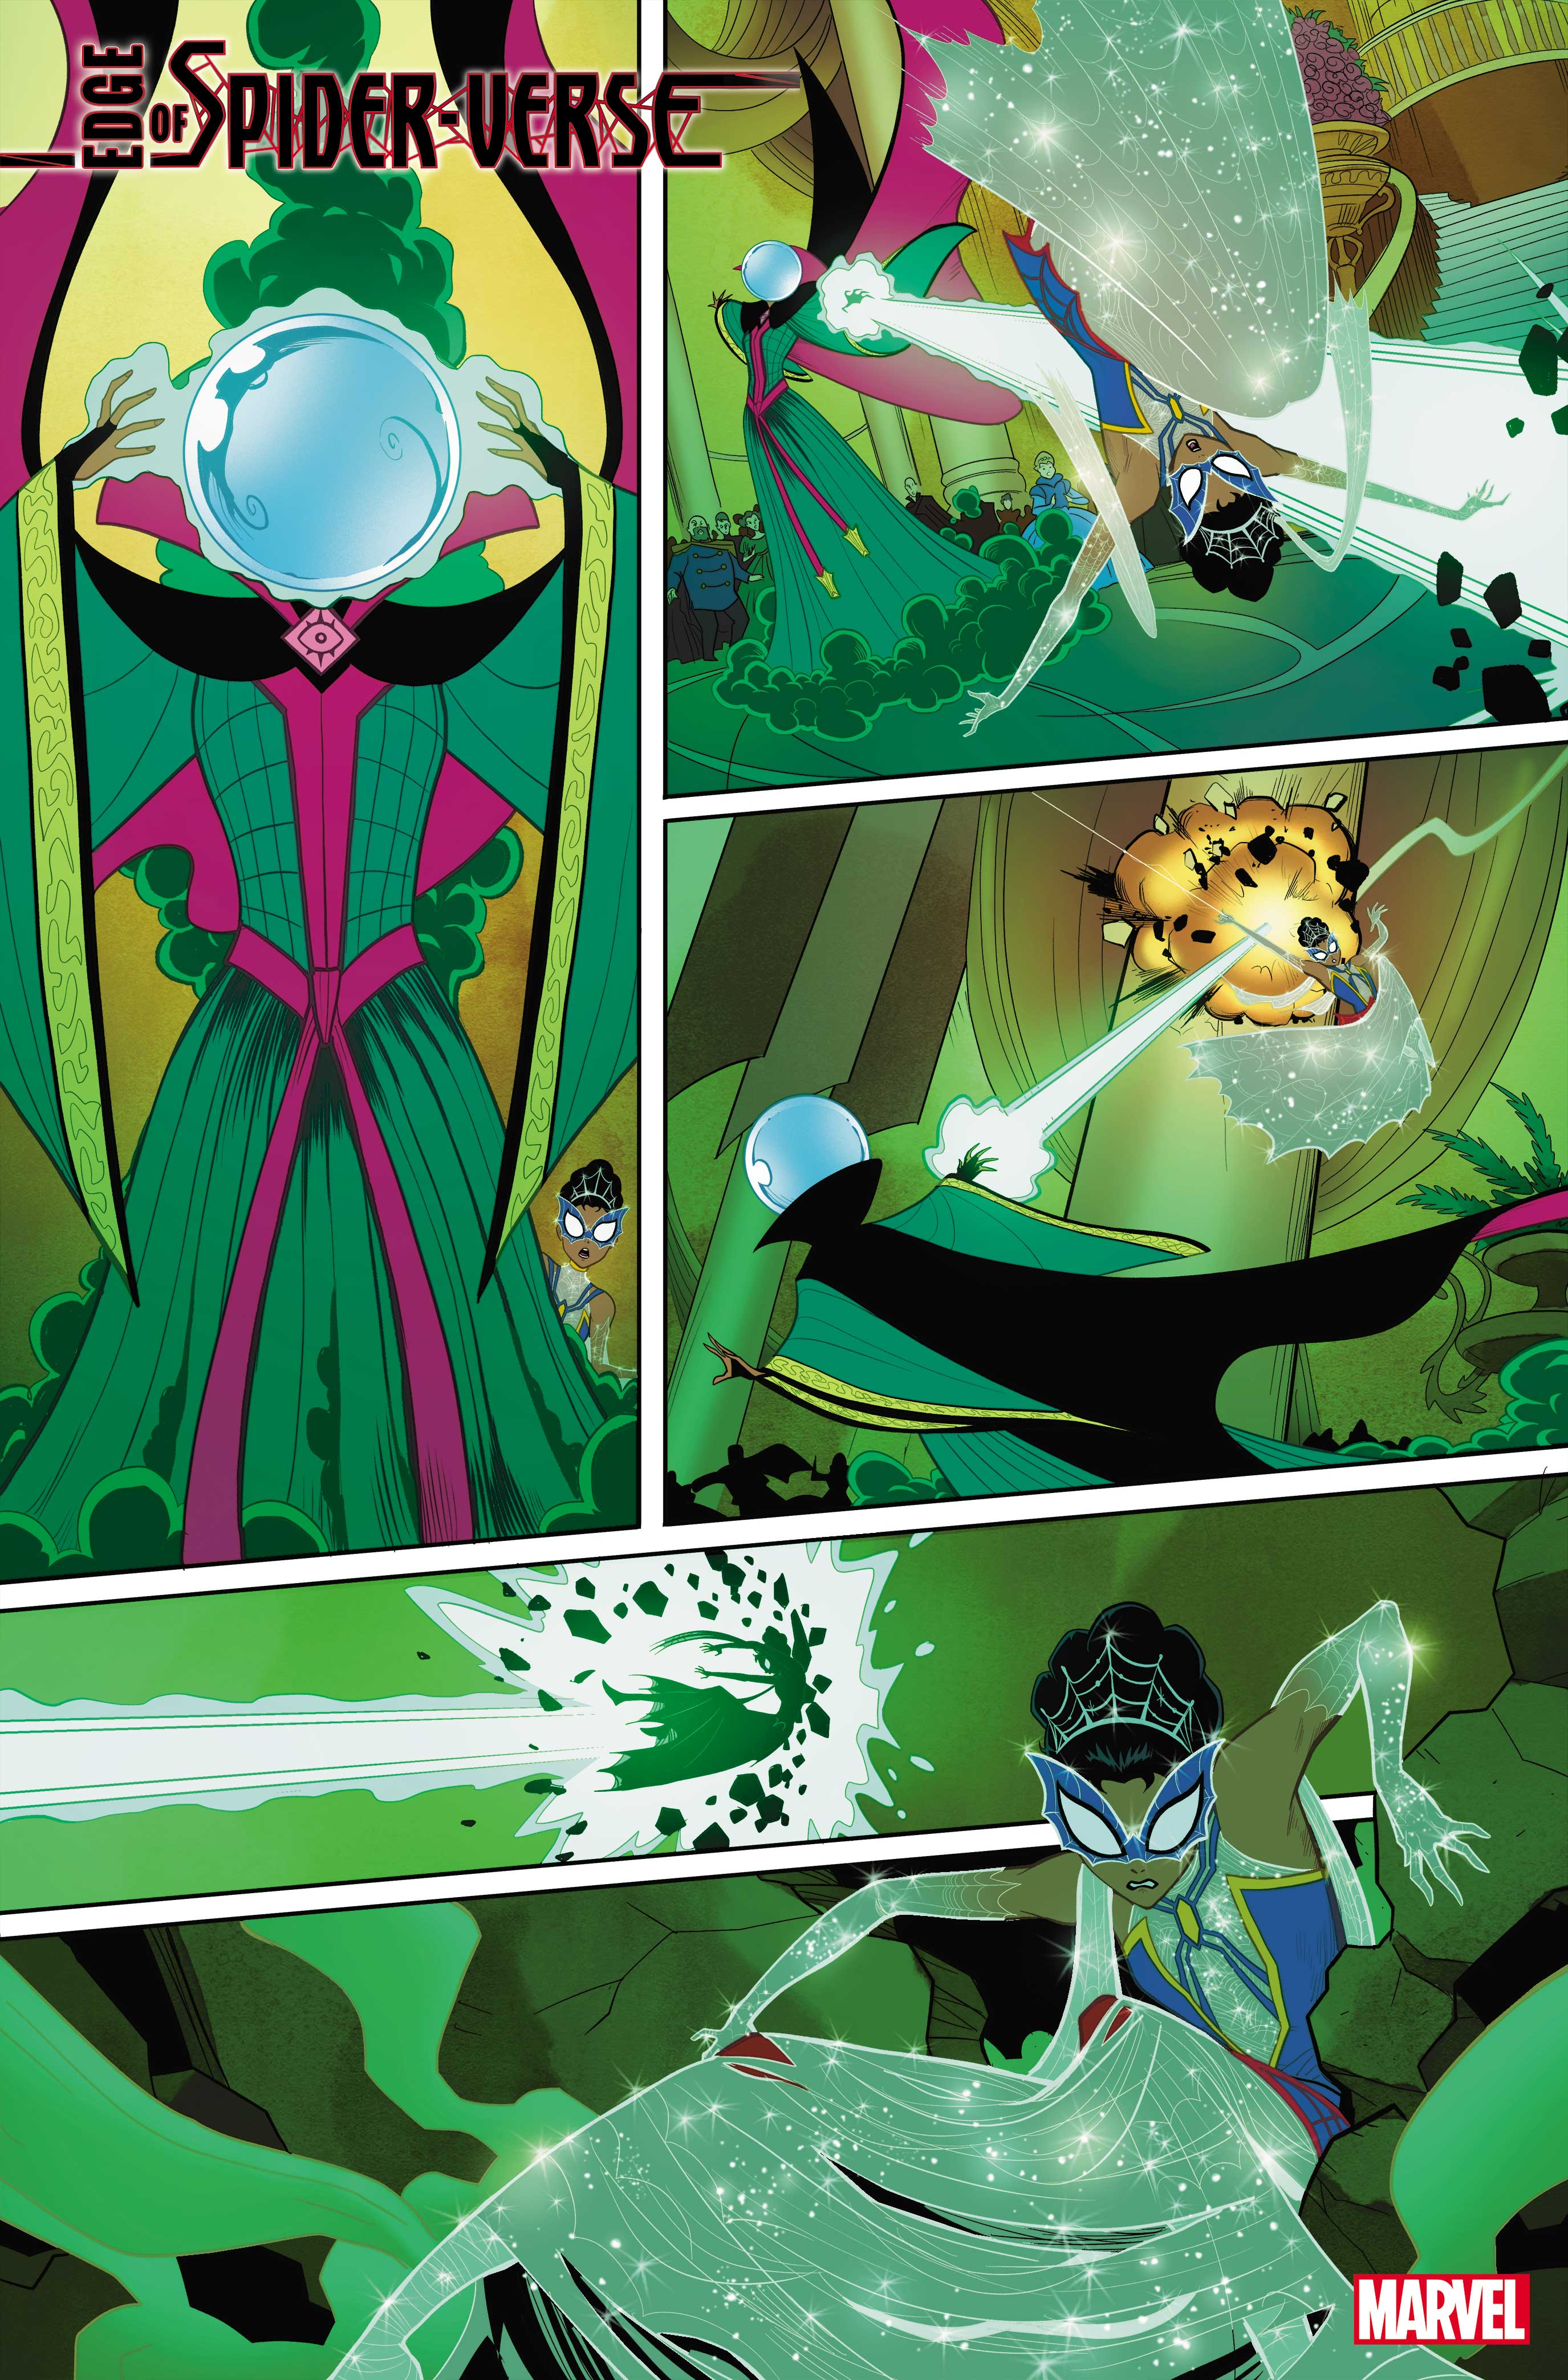 Edge of Spider-Verse #4 Interior with Spinstress